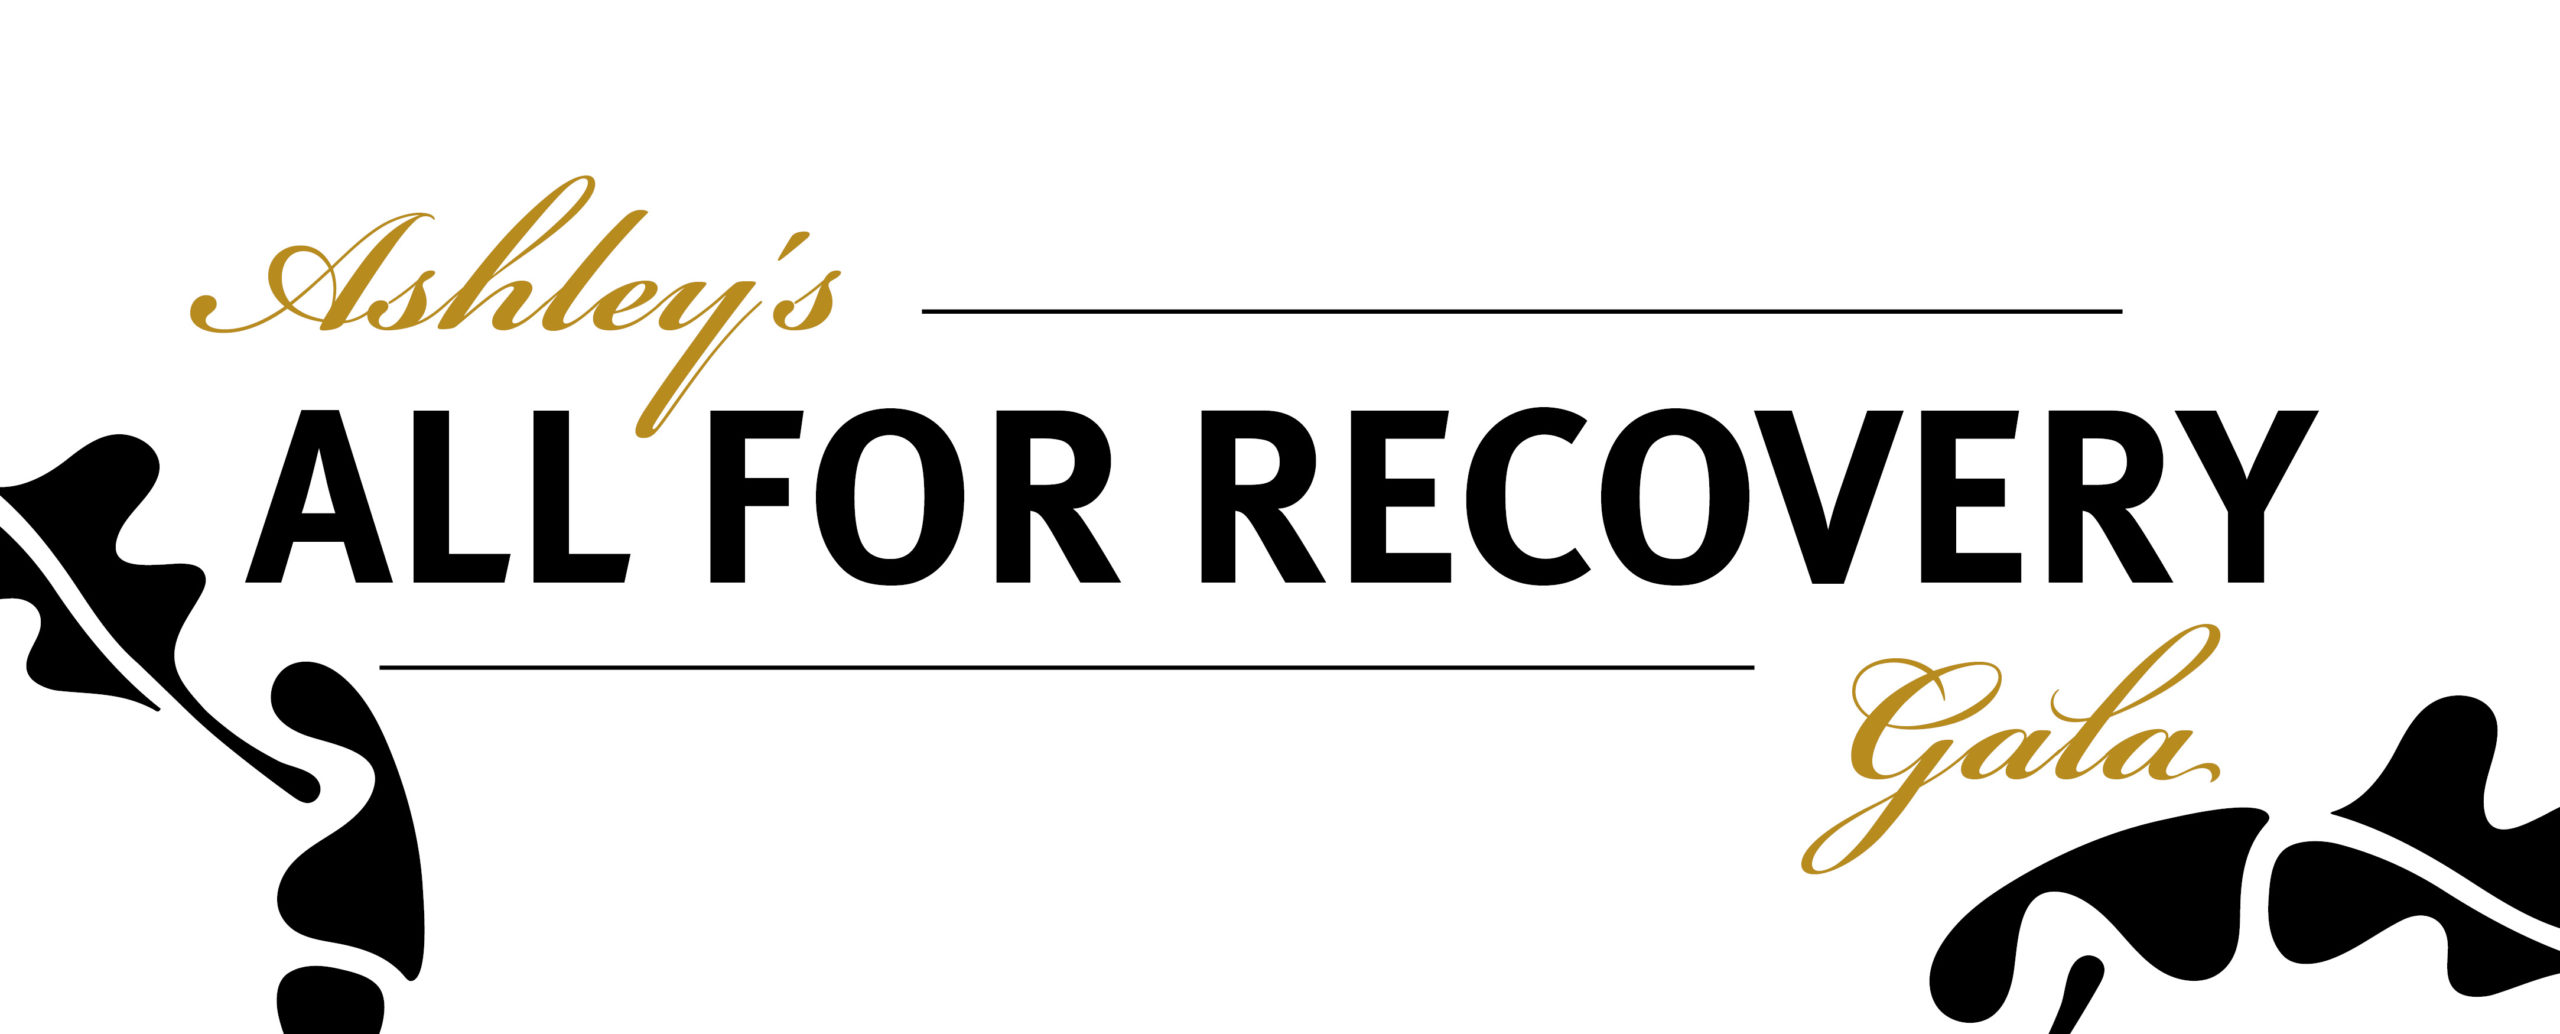 Ashley's All for Recovery Gala Hero Image